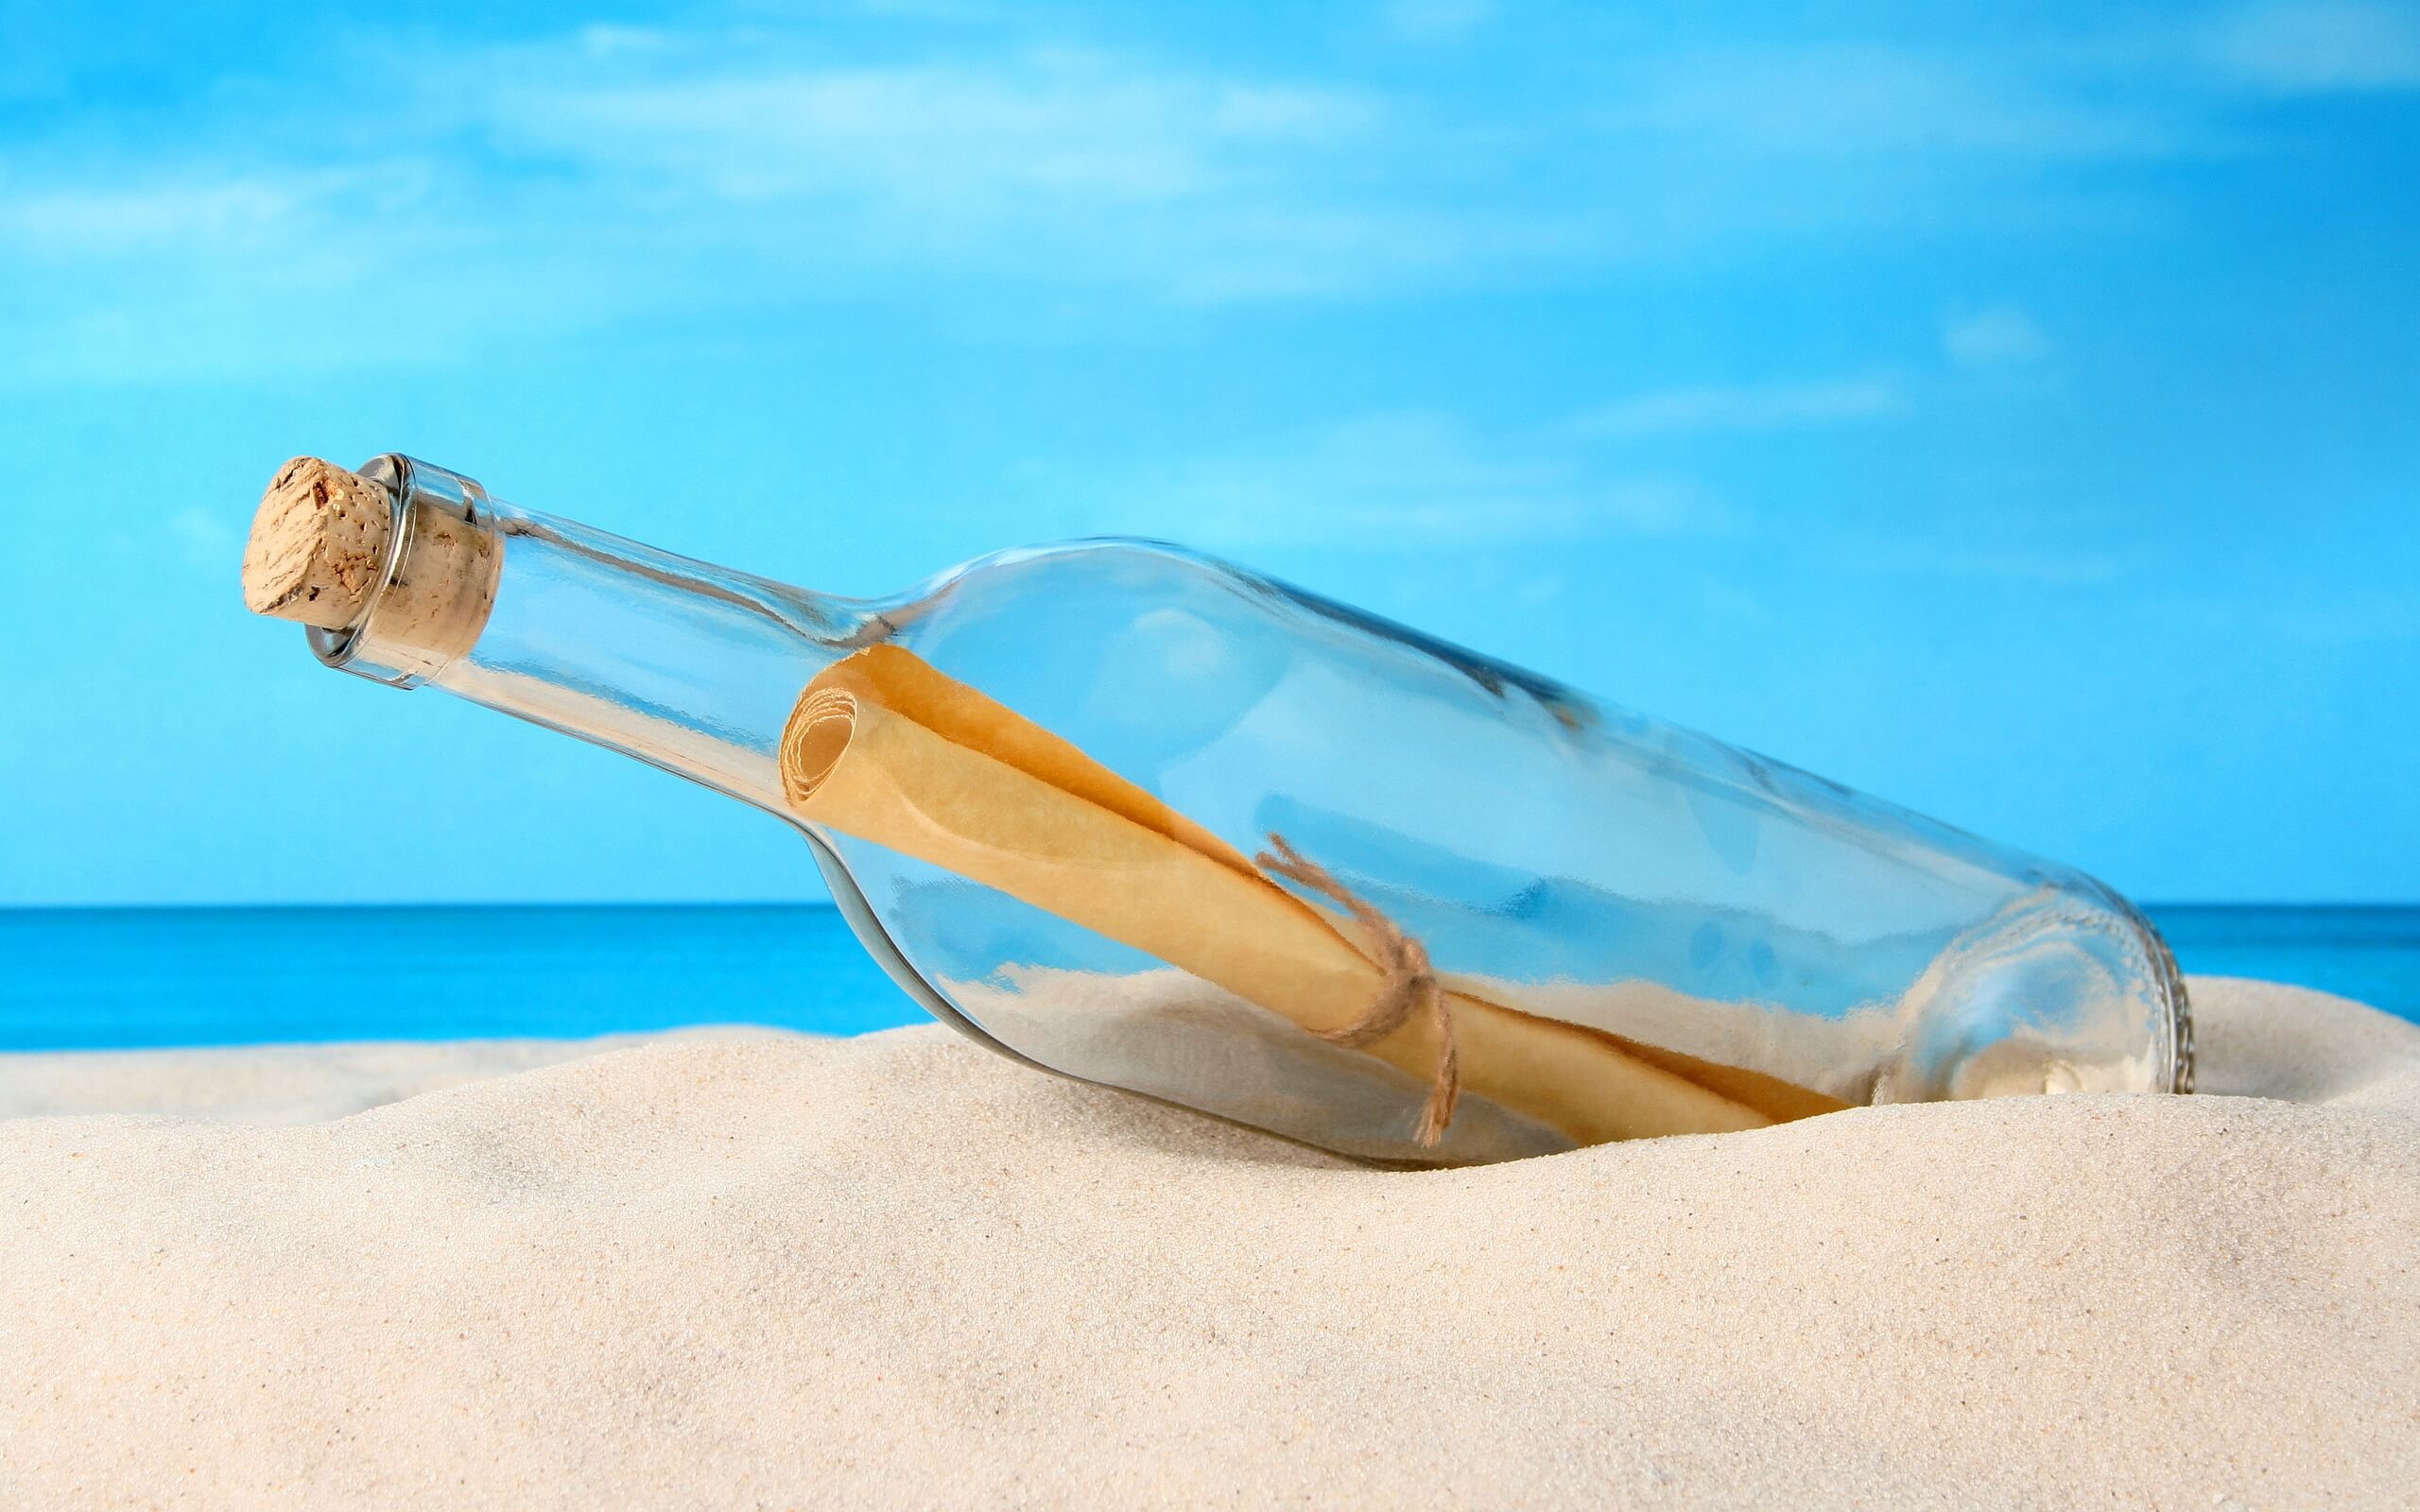 Message in a Bottle: Bottled notes released into oceans, Communication. 2560x1600 HD Wallpaper.